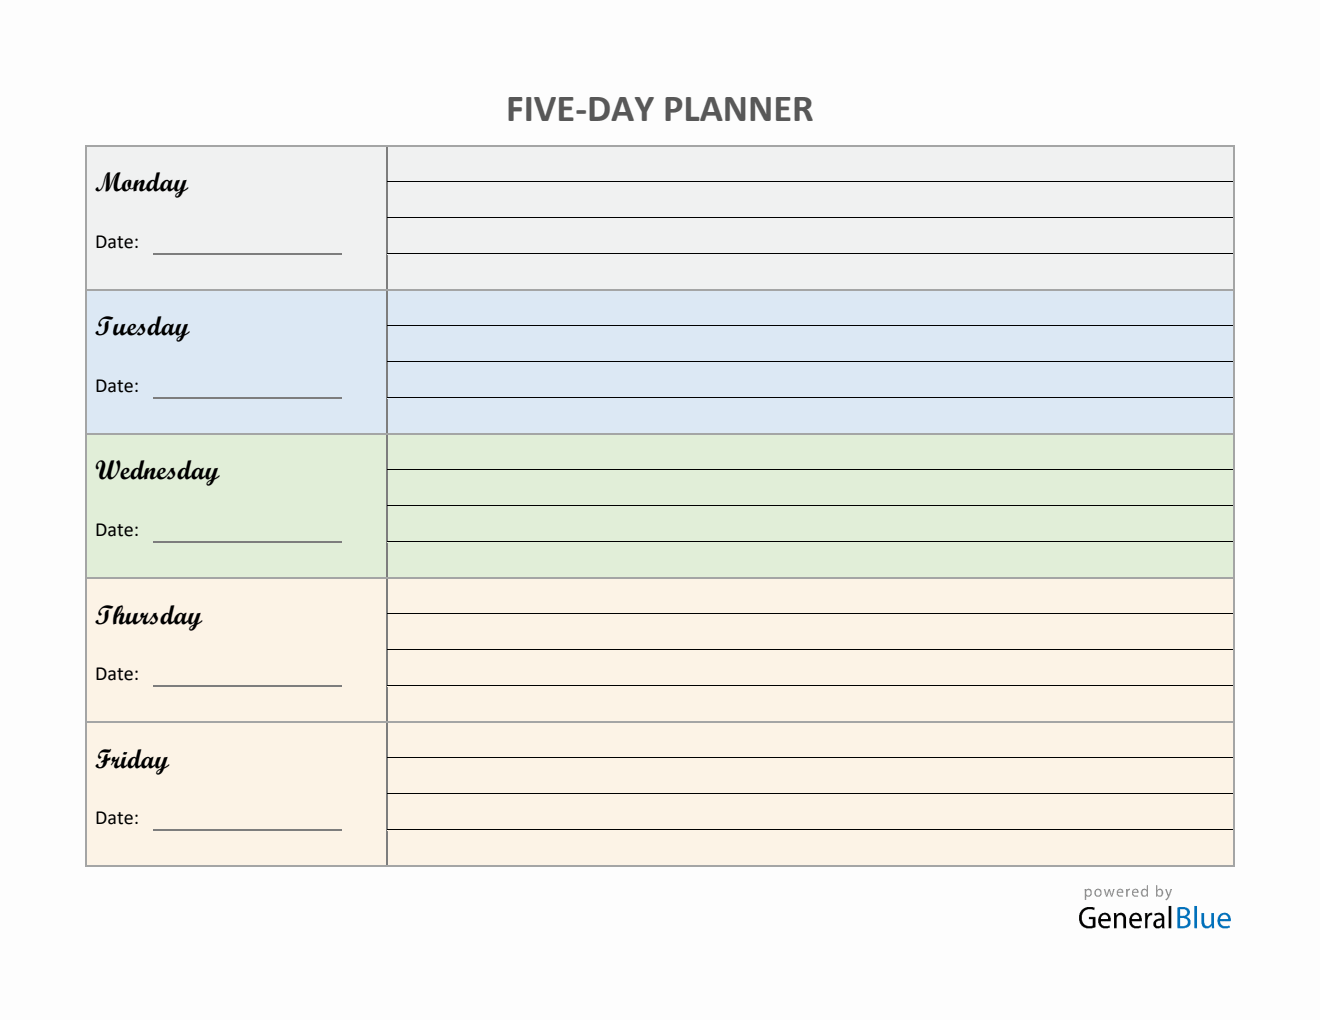 Five-Day Appointment Sheet Template in Word (Colorful)